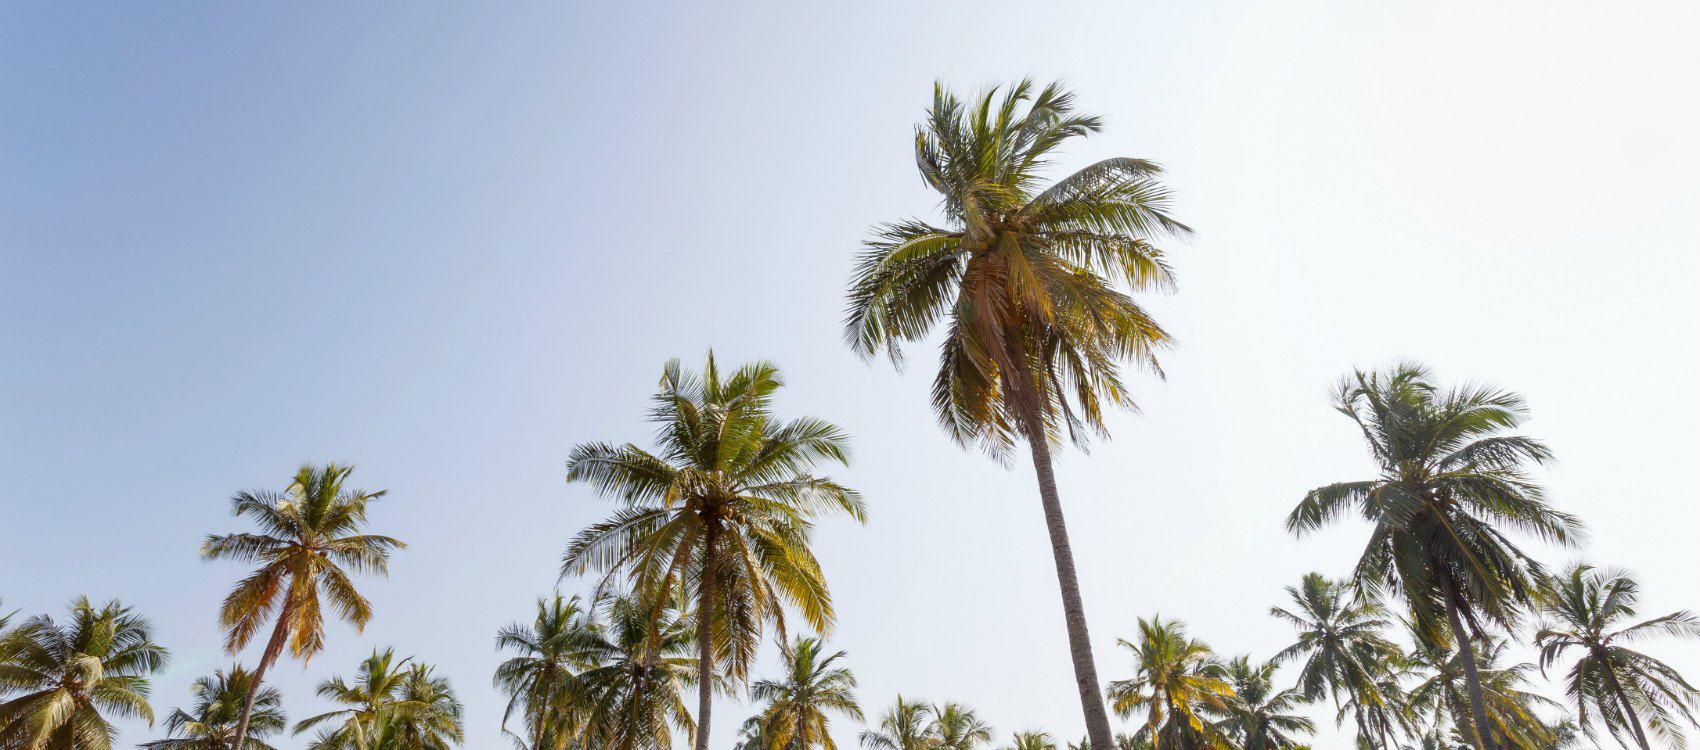 Palm trees with blue sky in background